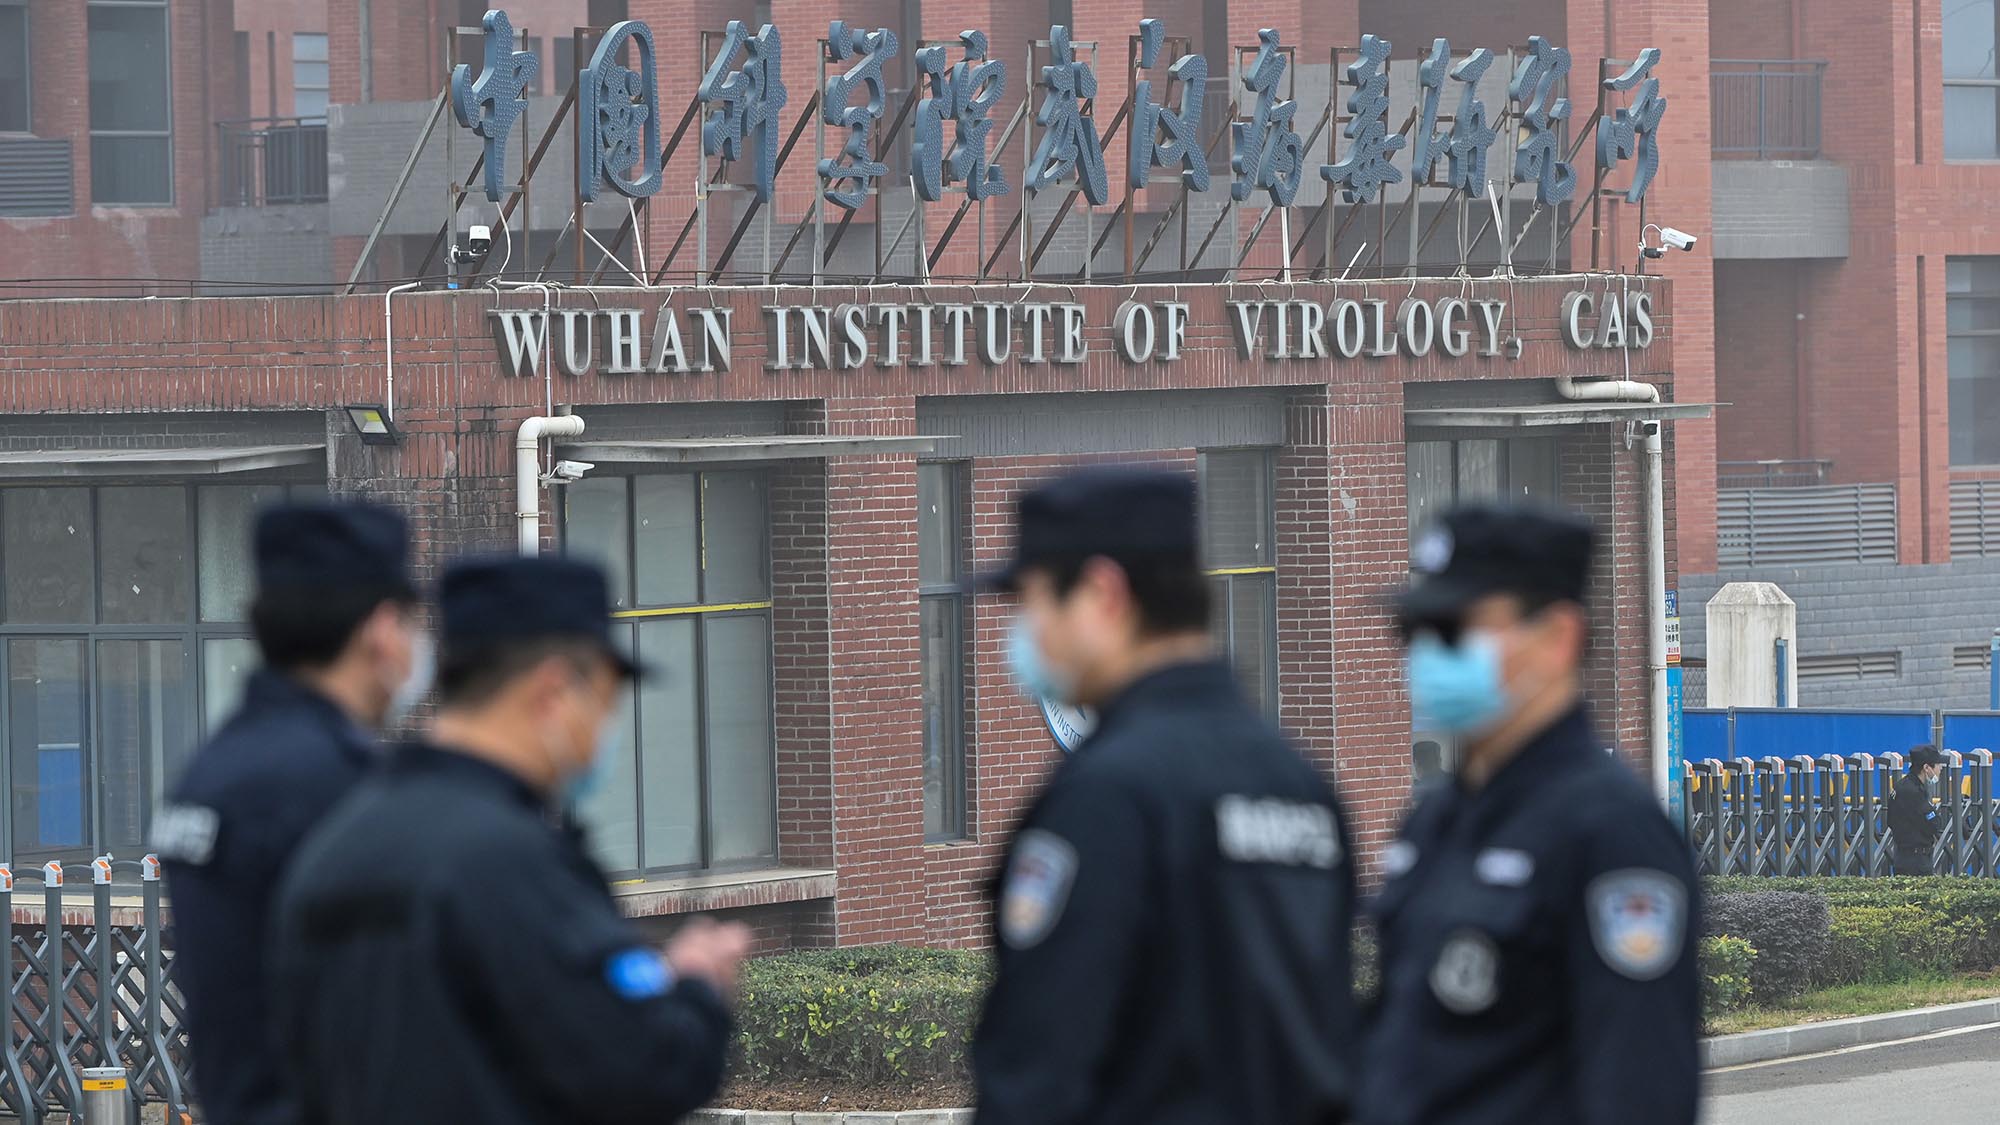 Security personnel stand guard outside the Wuhan Institute of Virology in Wuhan in February, as members of the World Health Organization (WHO) team investigating the origins of the Covid-19 coronavirus pay a visit.